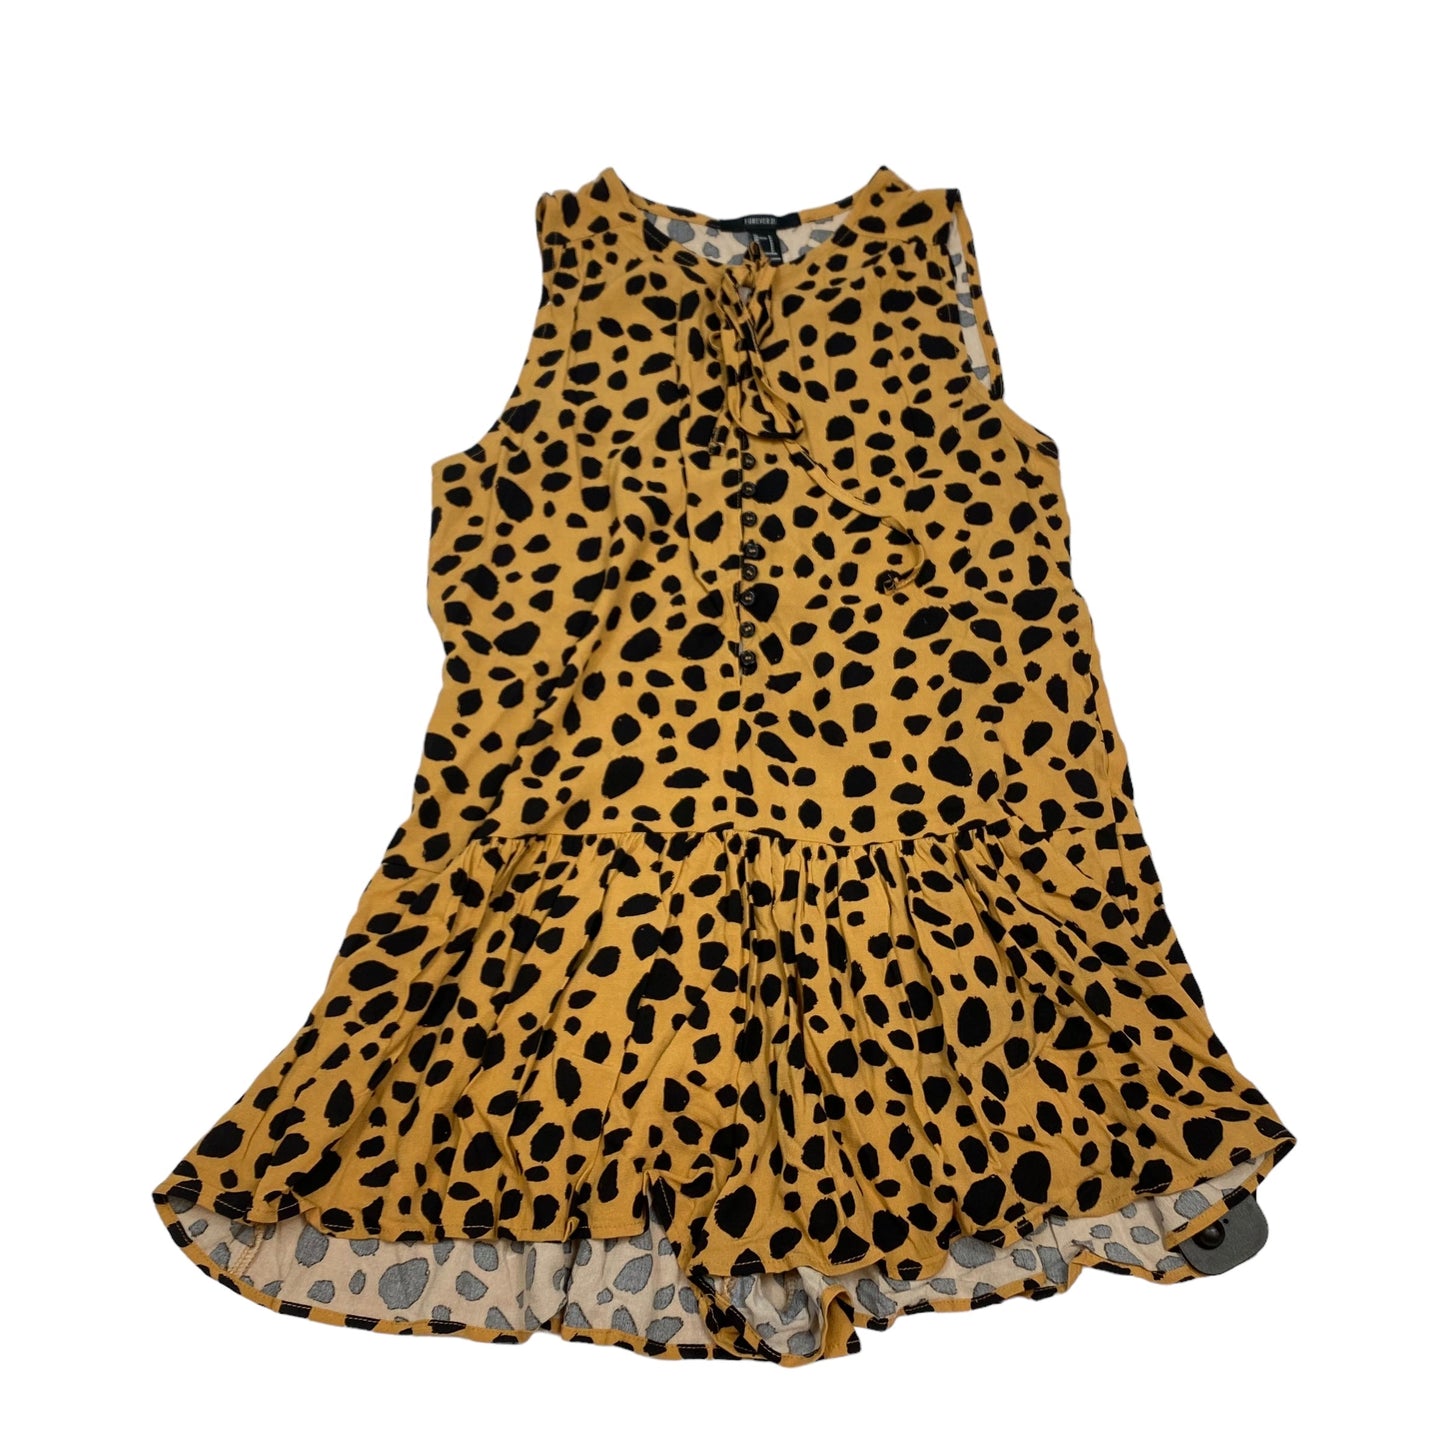 Animal Print Dress Casual Short Forever 21, Size S